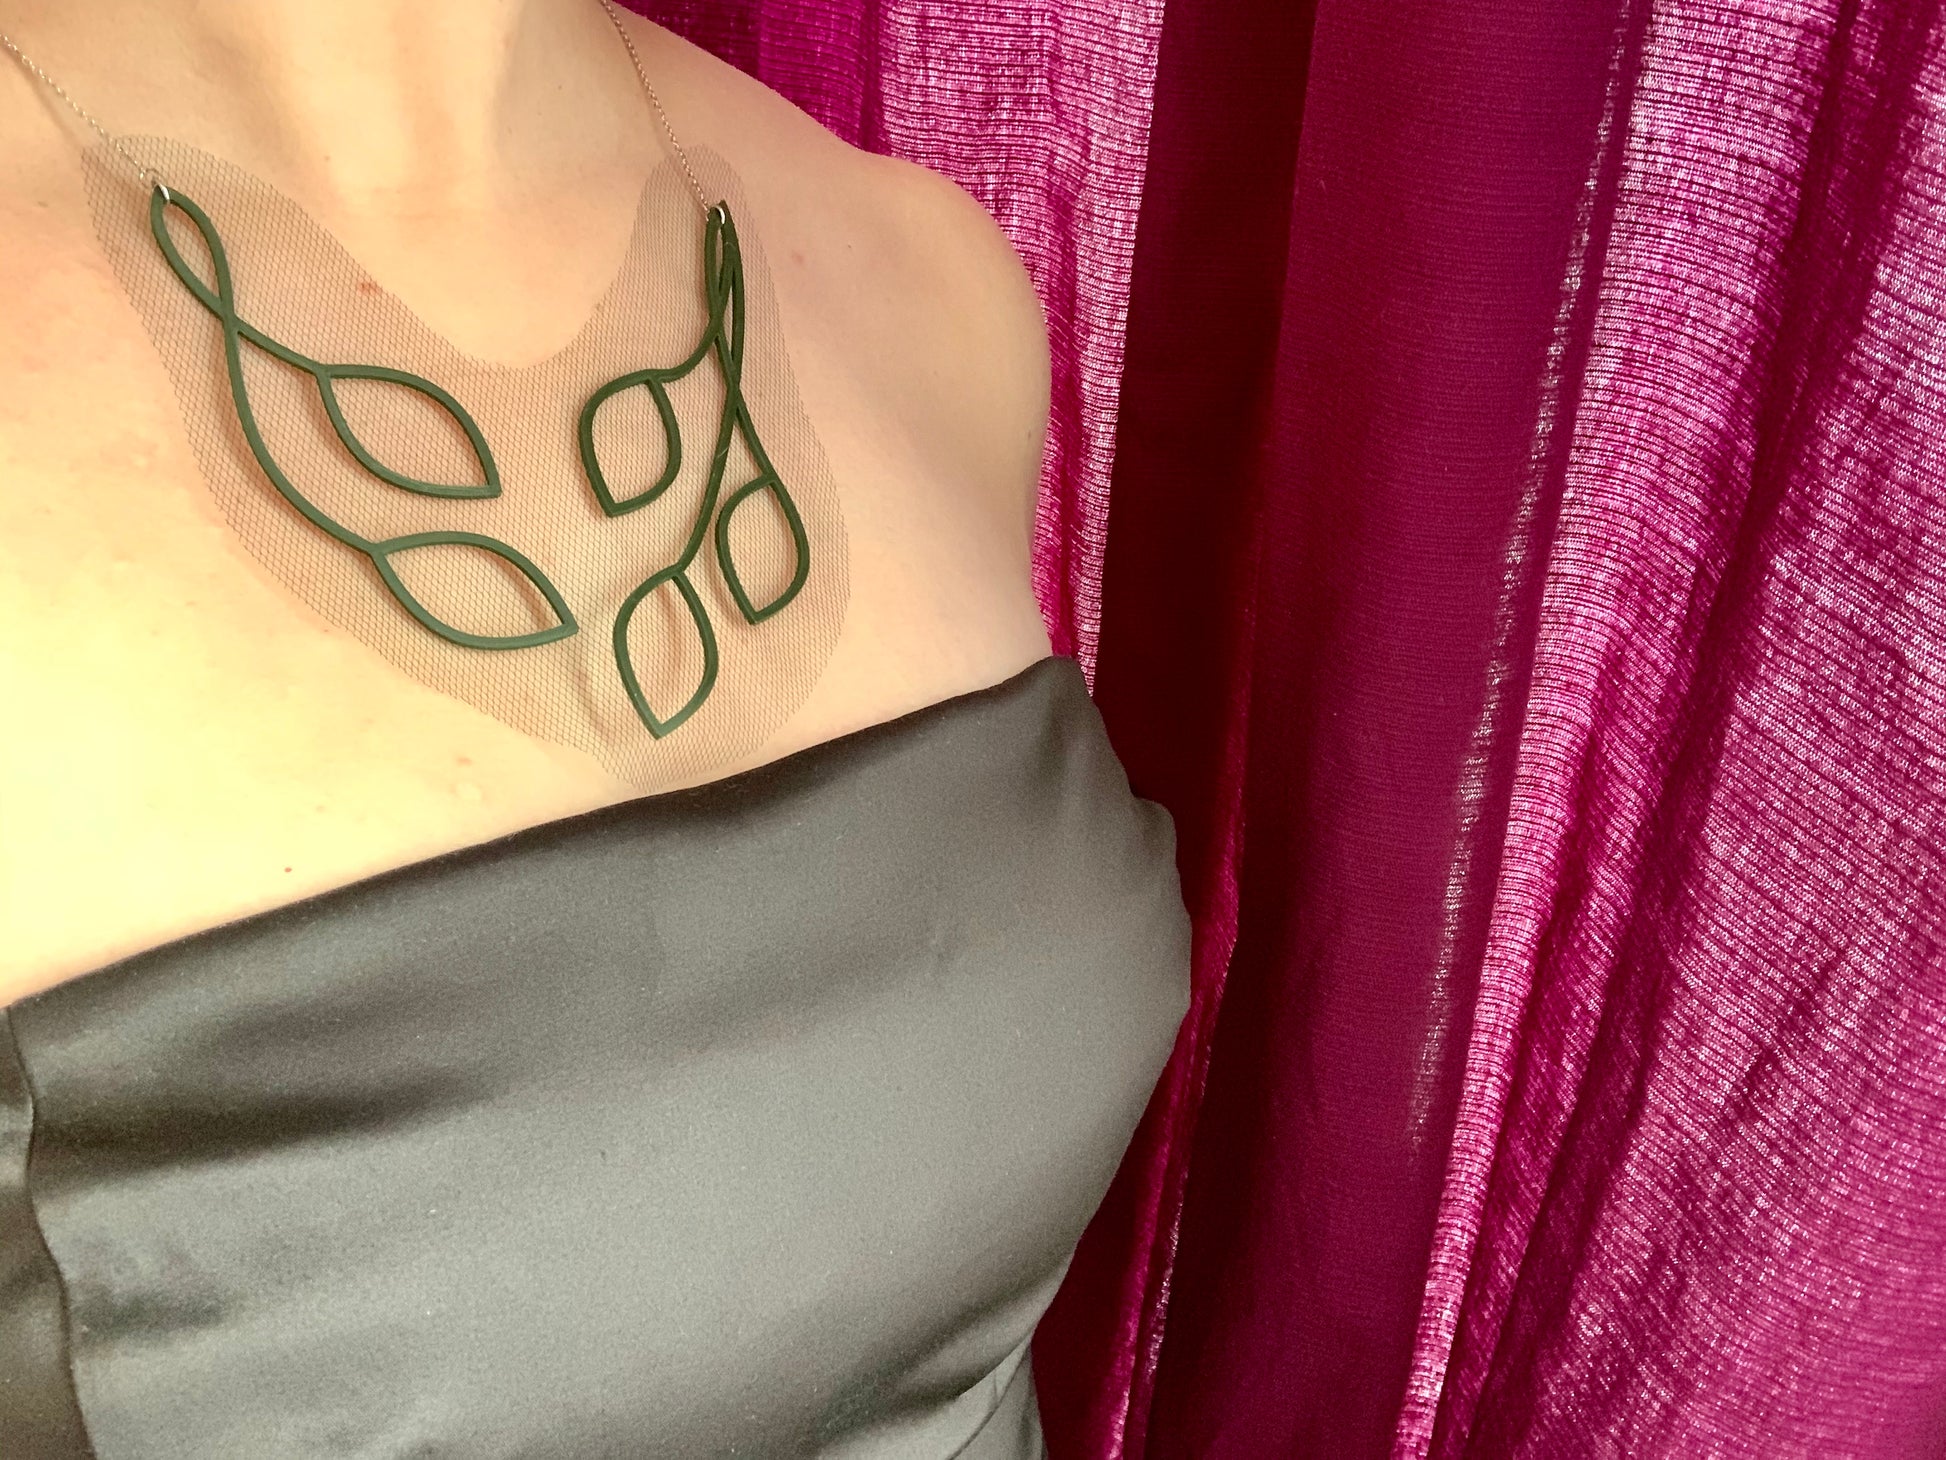 This shows a woman wearing a statement necklace and a satin black strapless dress. The necklace is olive green vines and leaves that twist into an elegant v shape. The piece is 3D Printed with sustainable plant based filament. It is olive green and embedded with a black tulle fabric so that there is a gap between the leaves and it almost has the effect of floating across one's collar bones. 